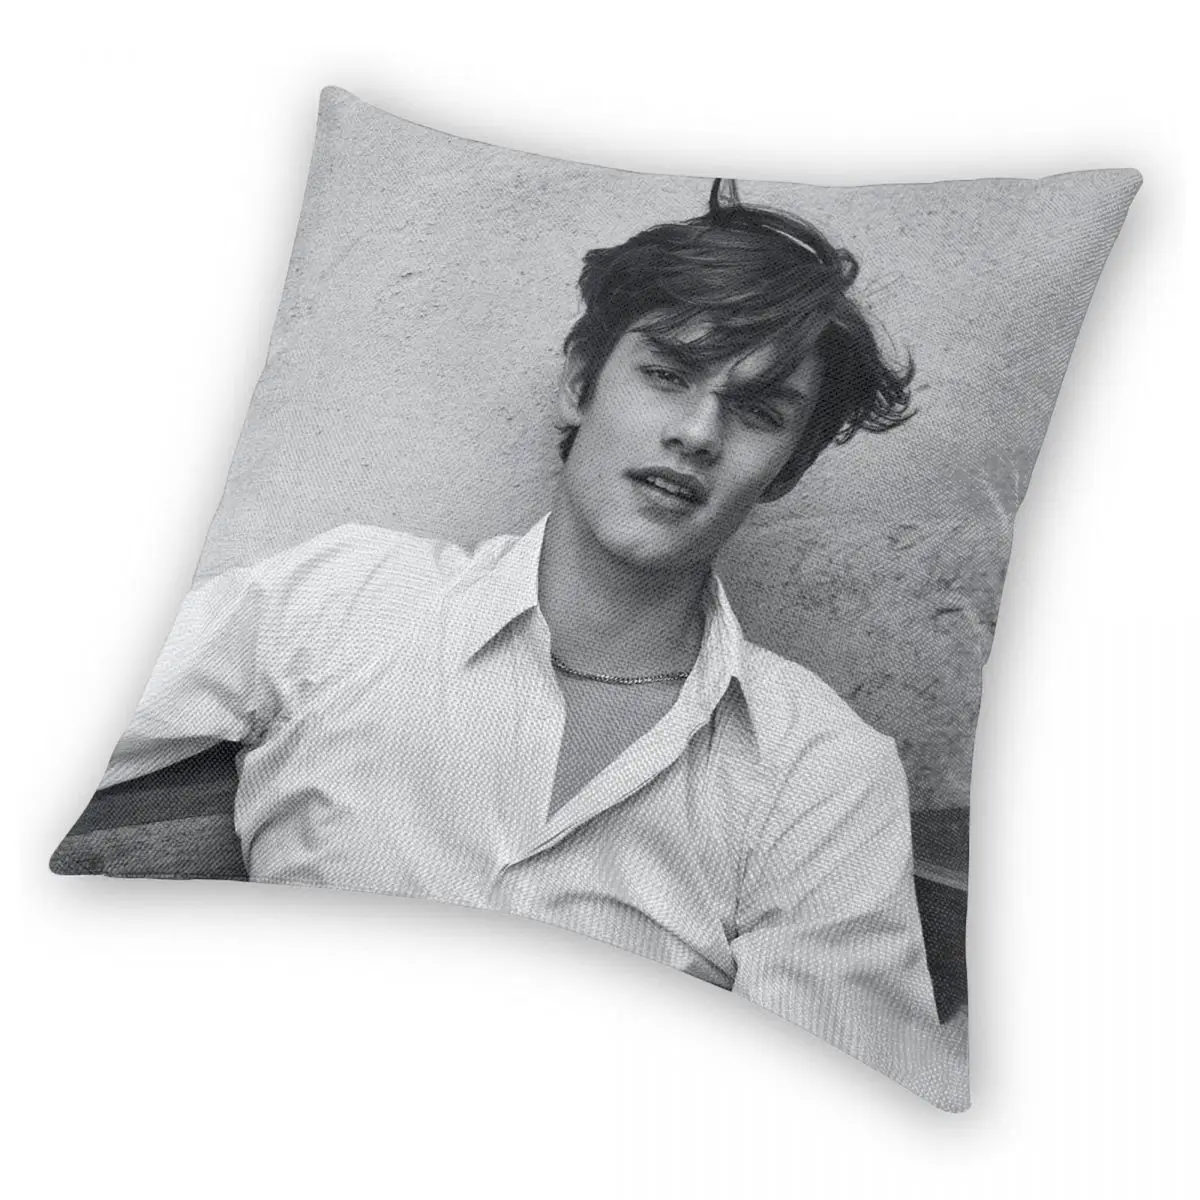 Covers Louis Partridge, Room Cushion Cover, Louis Cover Pillow